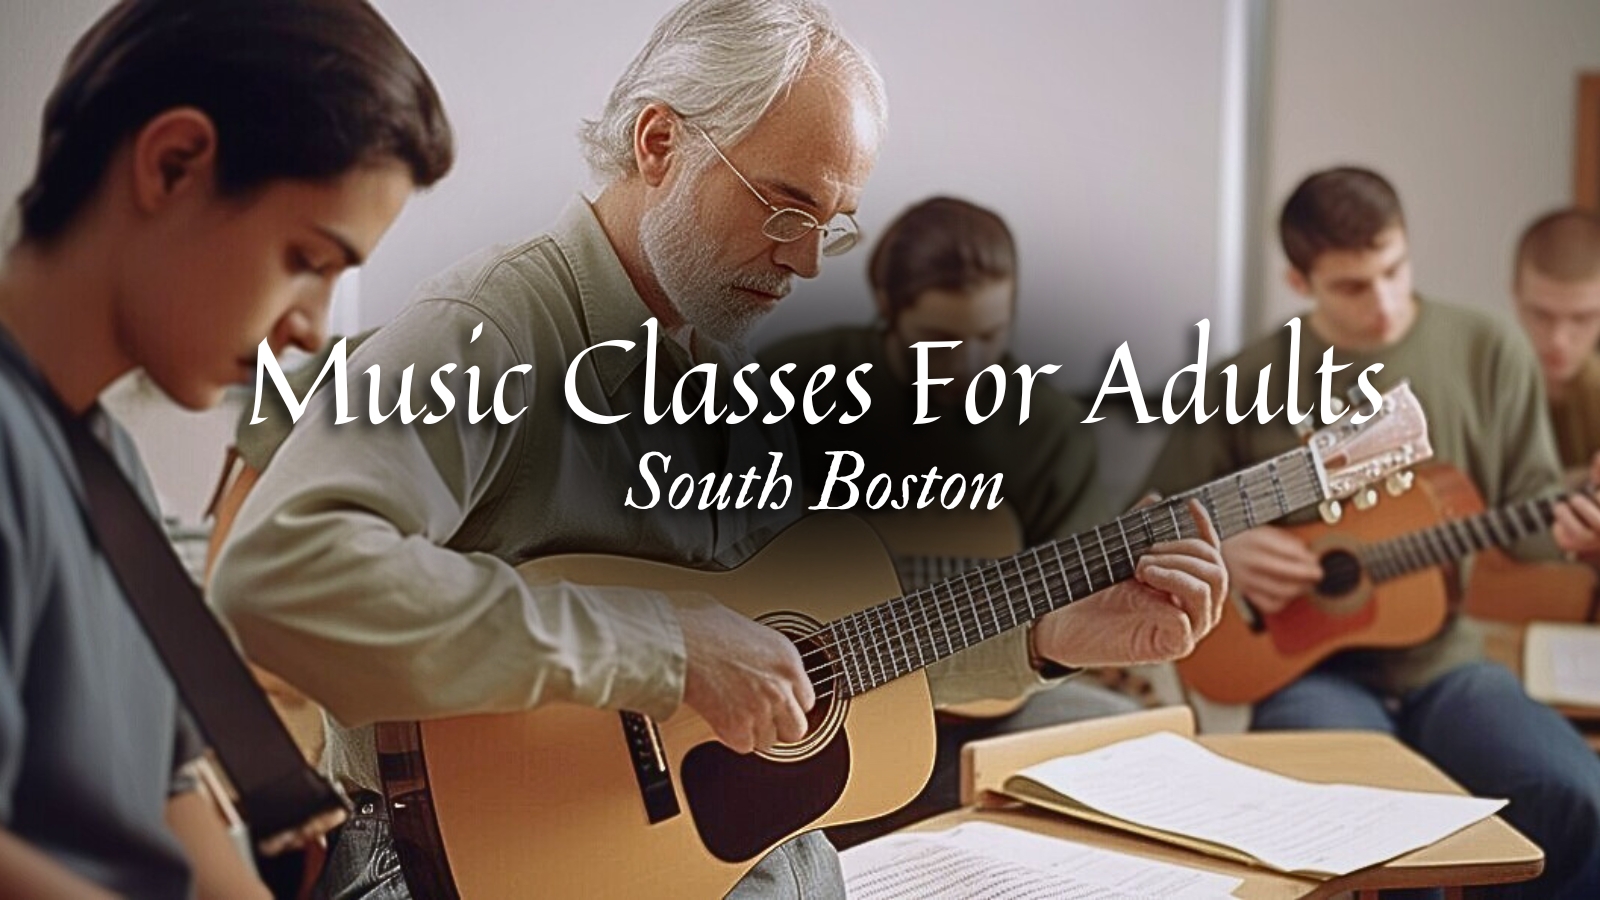 Music Classes for Adults in South Boston, Massachusetts: Unlock Your Musical Potential at Musicians Playground